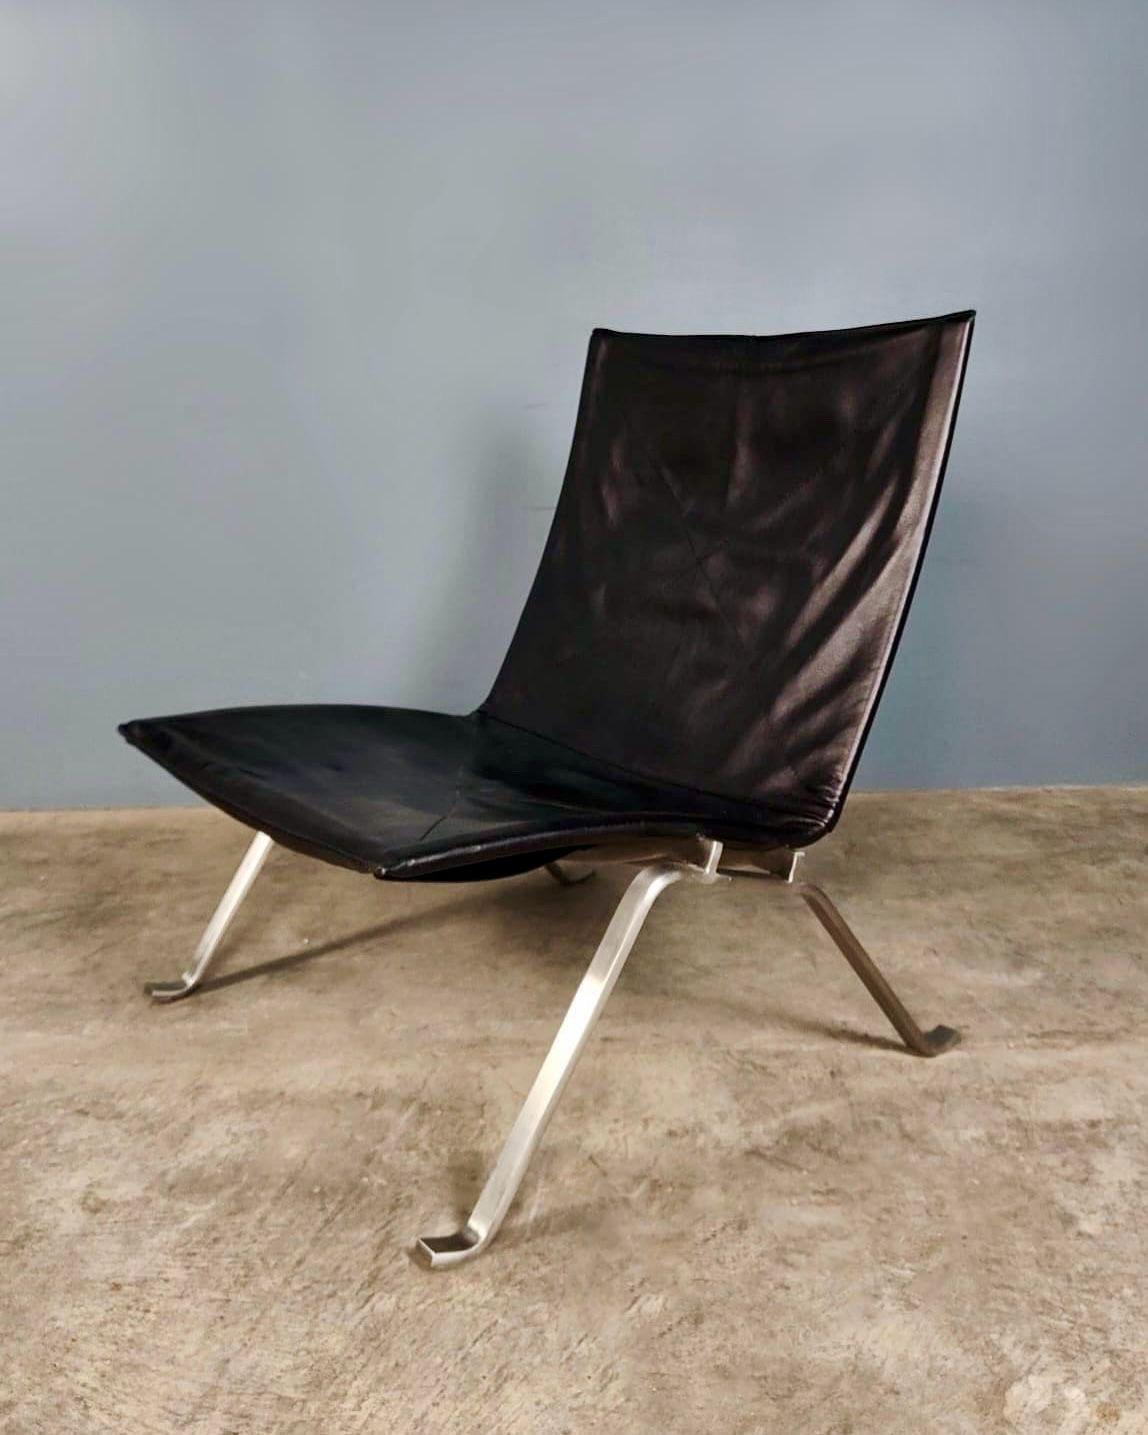 New Stock ✅

Poul Kjærholm PK22 Chair 1980 By Fritz Hansen and Ejvind Kold Christensen in Black Leather and Brushed Steel.

This piece is an original licensed Fritz Hansen piece with an authentic tag dating from 1980.

The discrete and elegant